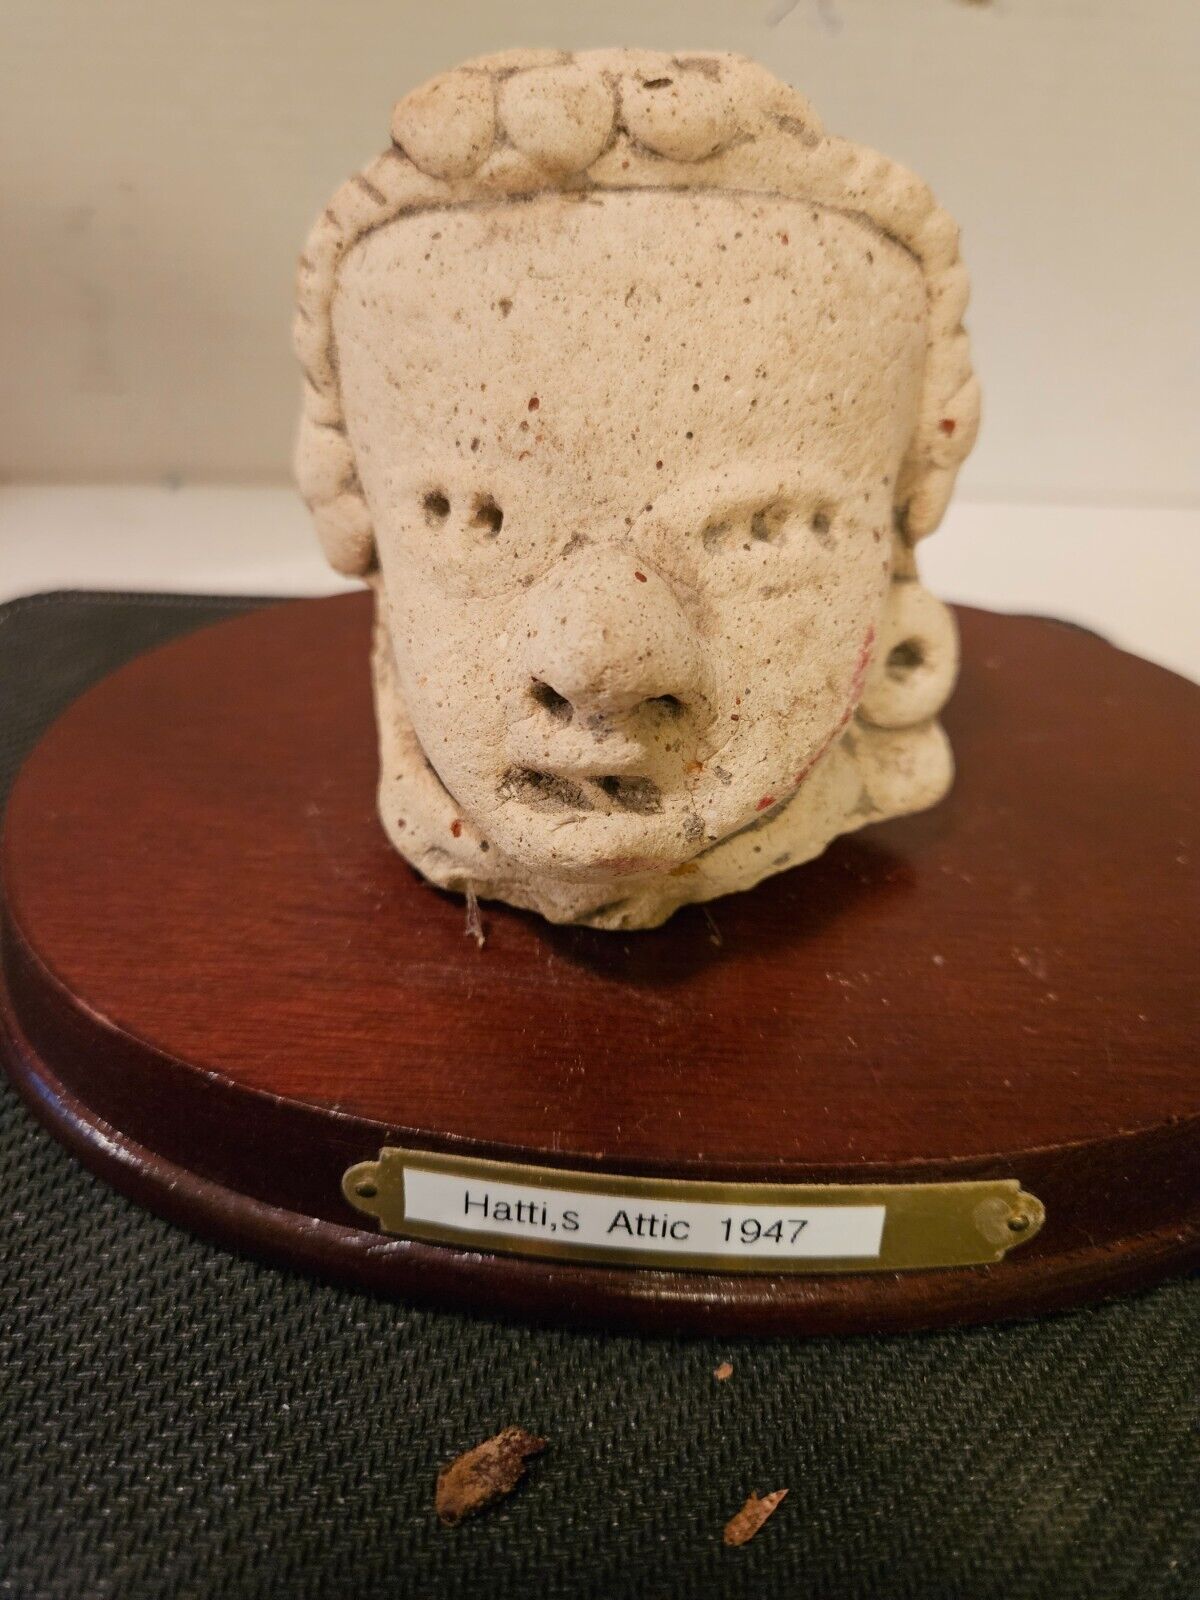 Antique rock formation of a Baby Face found at a estate sale